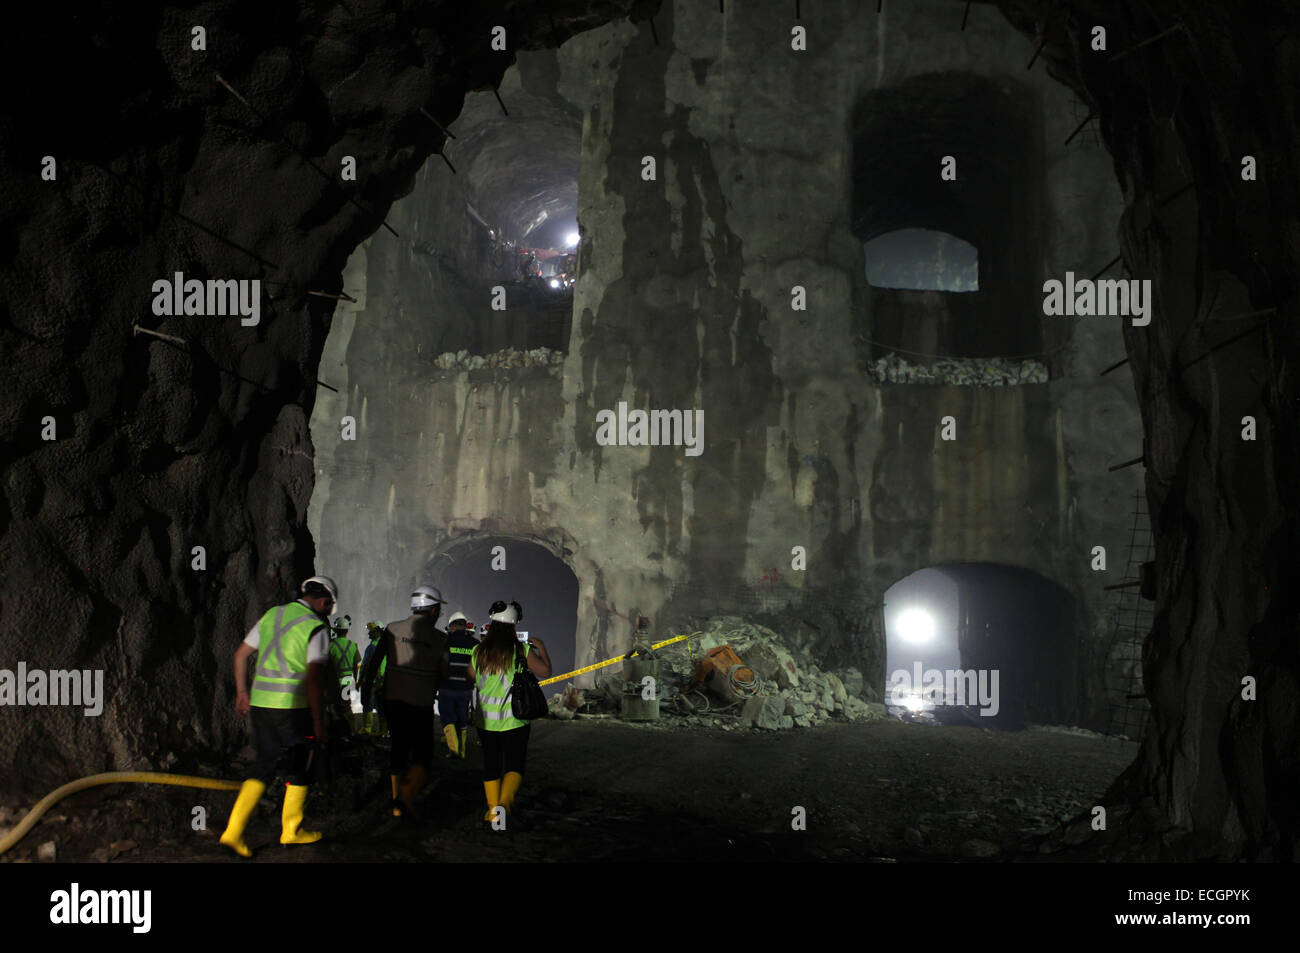 Sucumbios. 4th July, 2013. File photo taken on July 4, 2013 shows workers working at the hydroelectric plant Coca Codo Sinclair in Sucumbois province of Ecuador. A tunnel collapse in a Chinese hydroelectric plant in Ecuador's Amazonian region Saturday night killed 13 workers, including three Chinese and 10 Ecuadorians, and injured another 12. Coca Codo Sinclair, the largest hydroelectric plant project in Ecuador, is constructed by Chinese company Sinohydro starting from 2010. It is expected that the plant will begin operation in 2016. © Santiago Armas/Xinhua/Alamy Live News Stock Photo